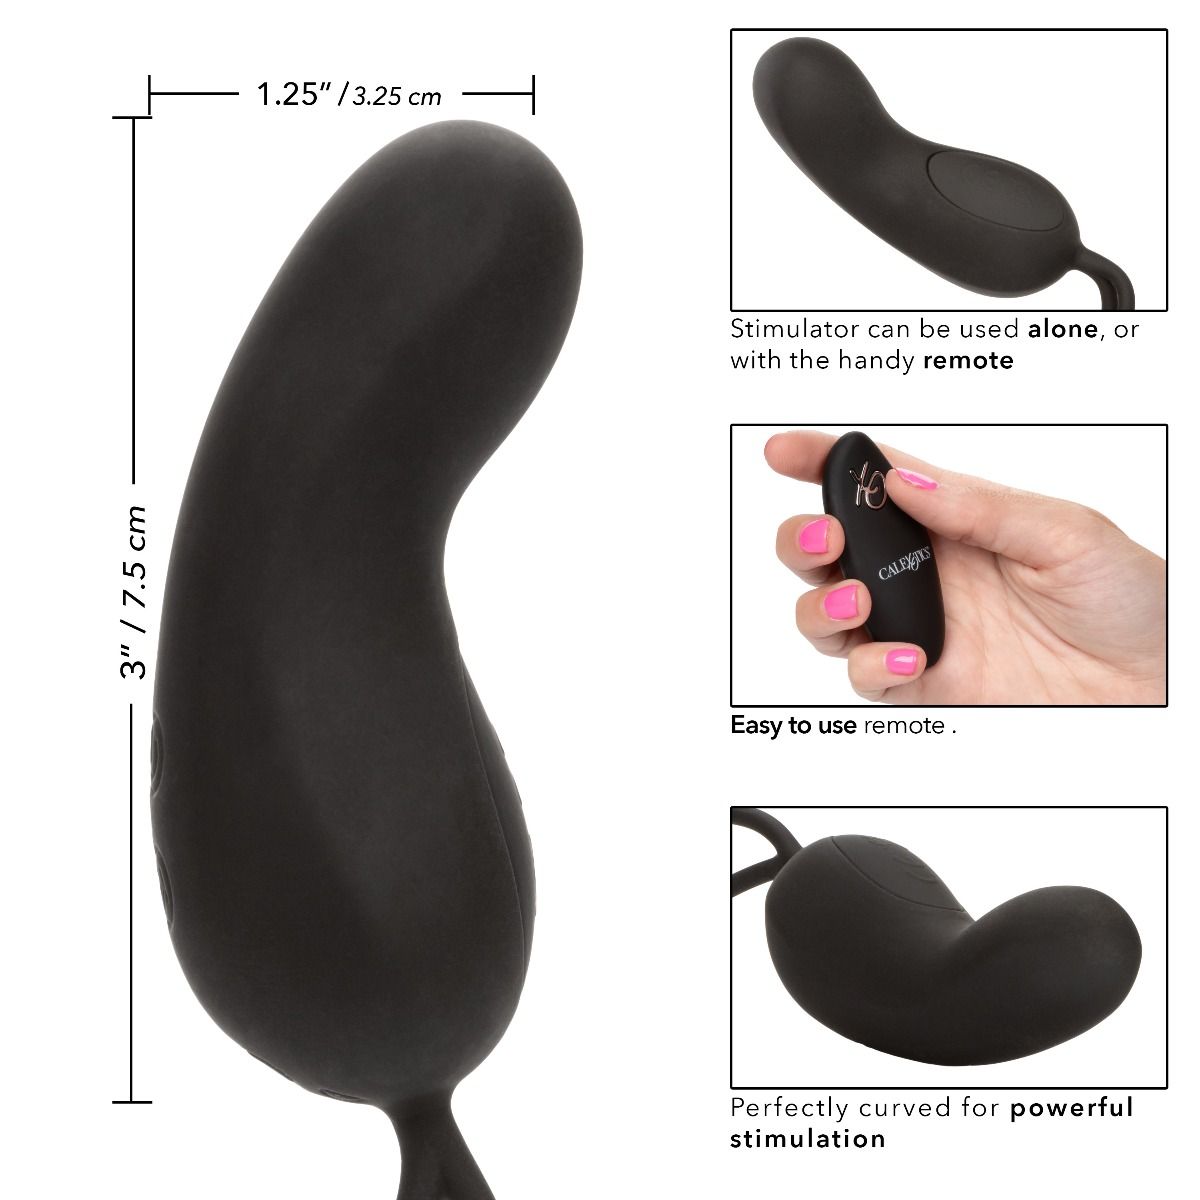 CalEx Silicone Remote Rechargeable Curve